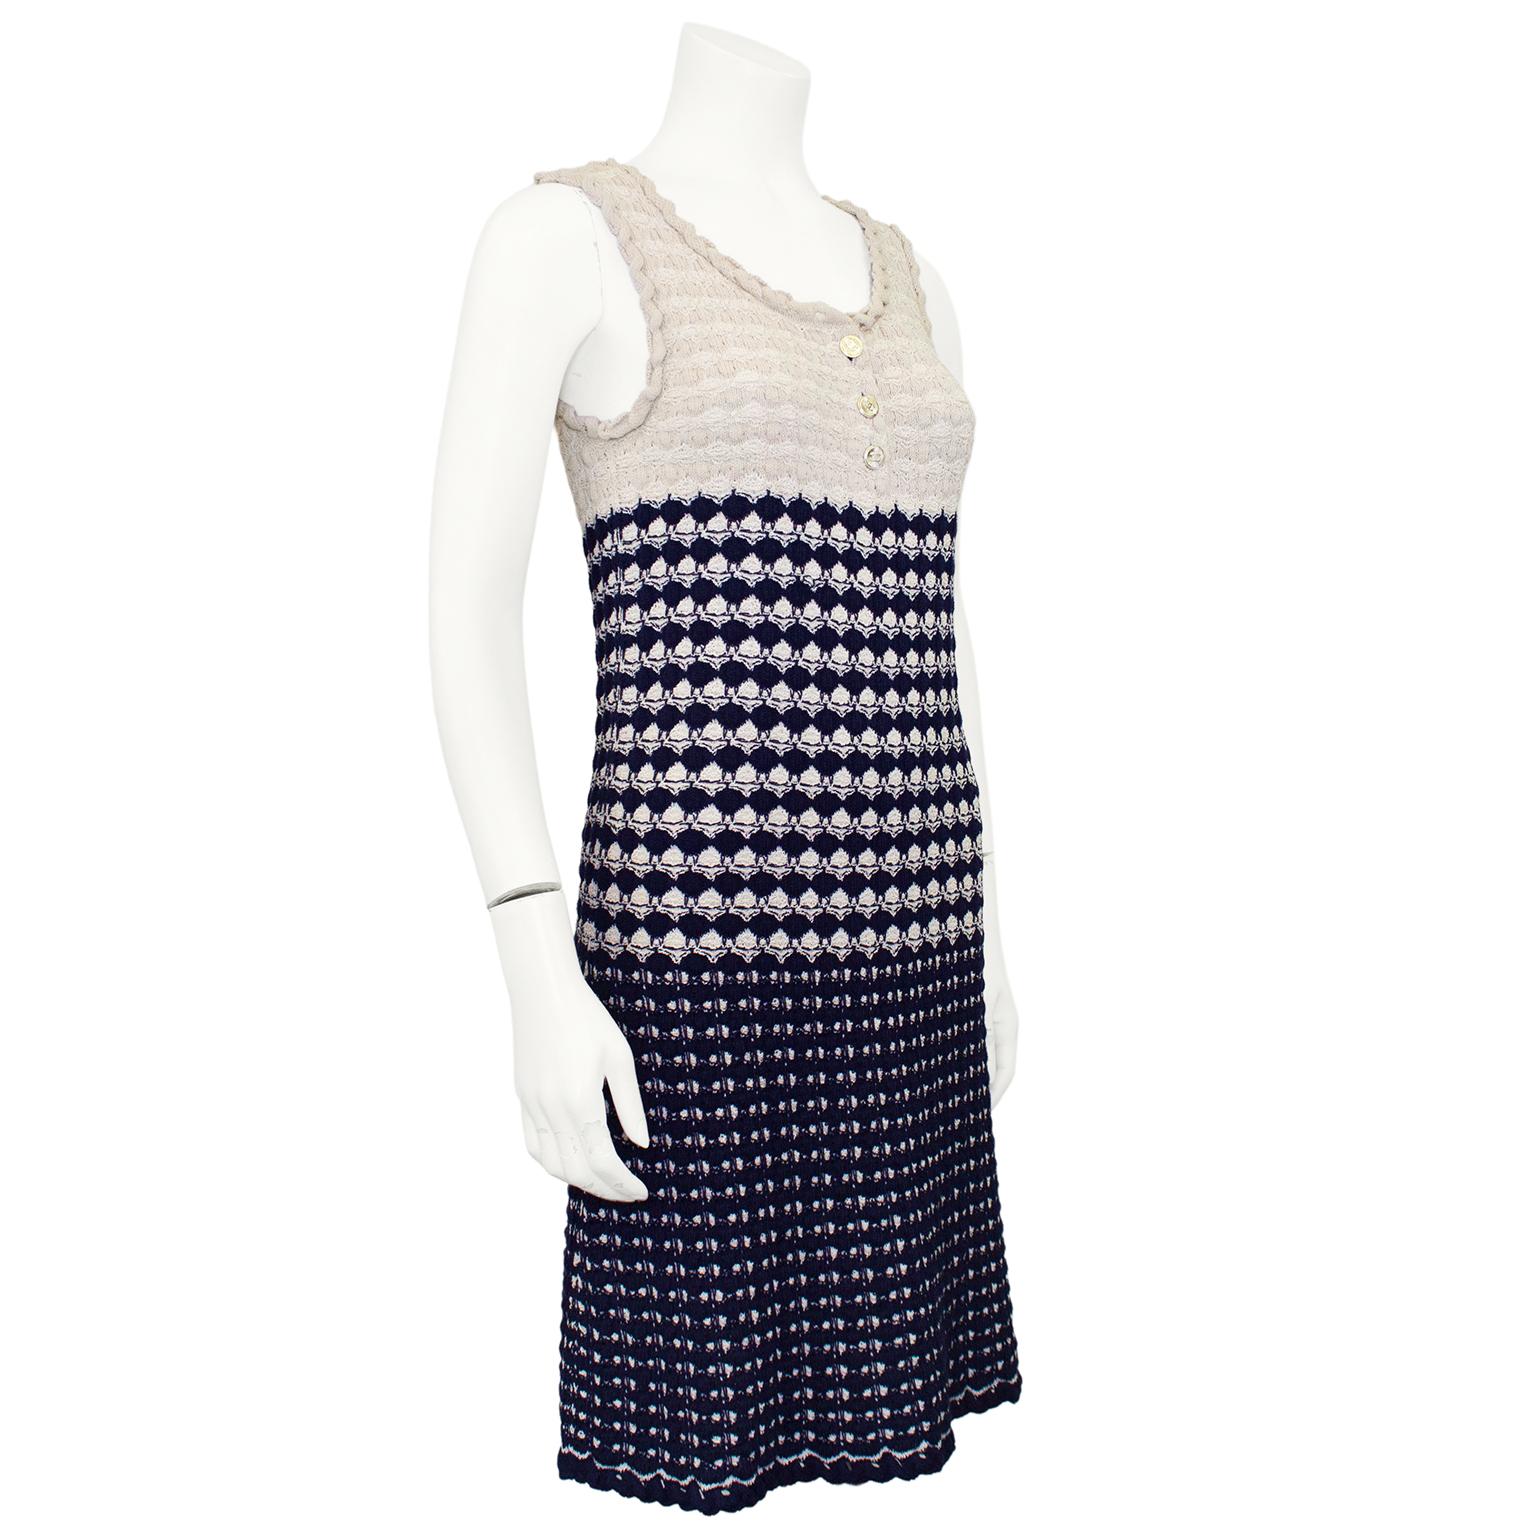 Chic Chanel scallop knit day dress from the Spring/Summer 2012 collection. 40% rayon, 33% cotton, 24% silk, 3% polyester beige and navy blue knit with a twisted trim at the neckline and straps. Sleeveless with a scoop neck and three gold tone metal